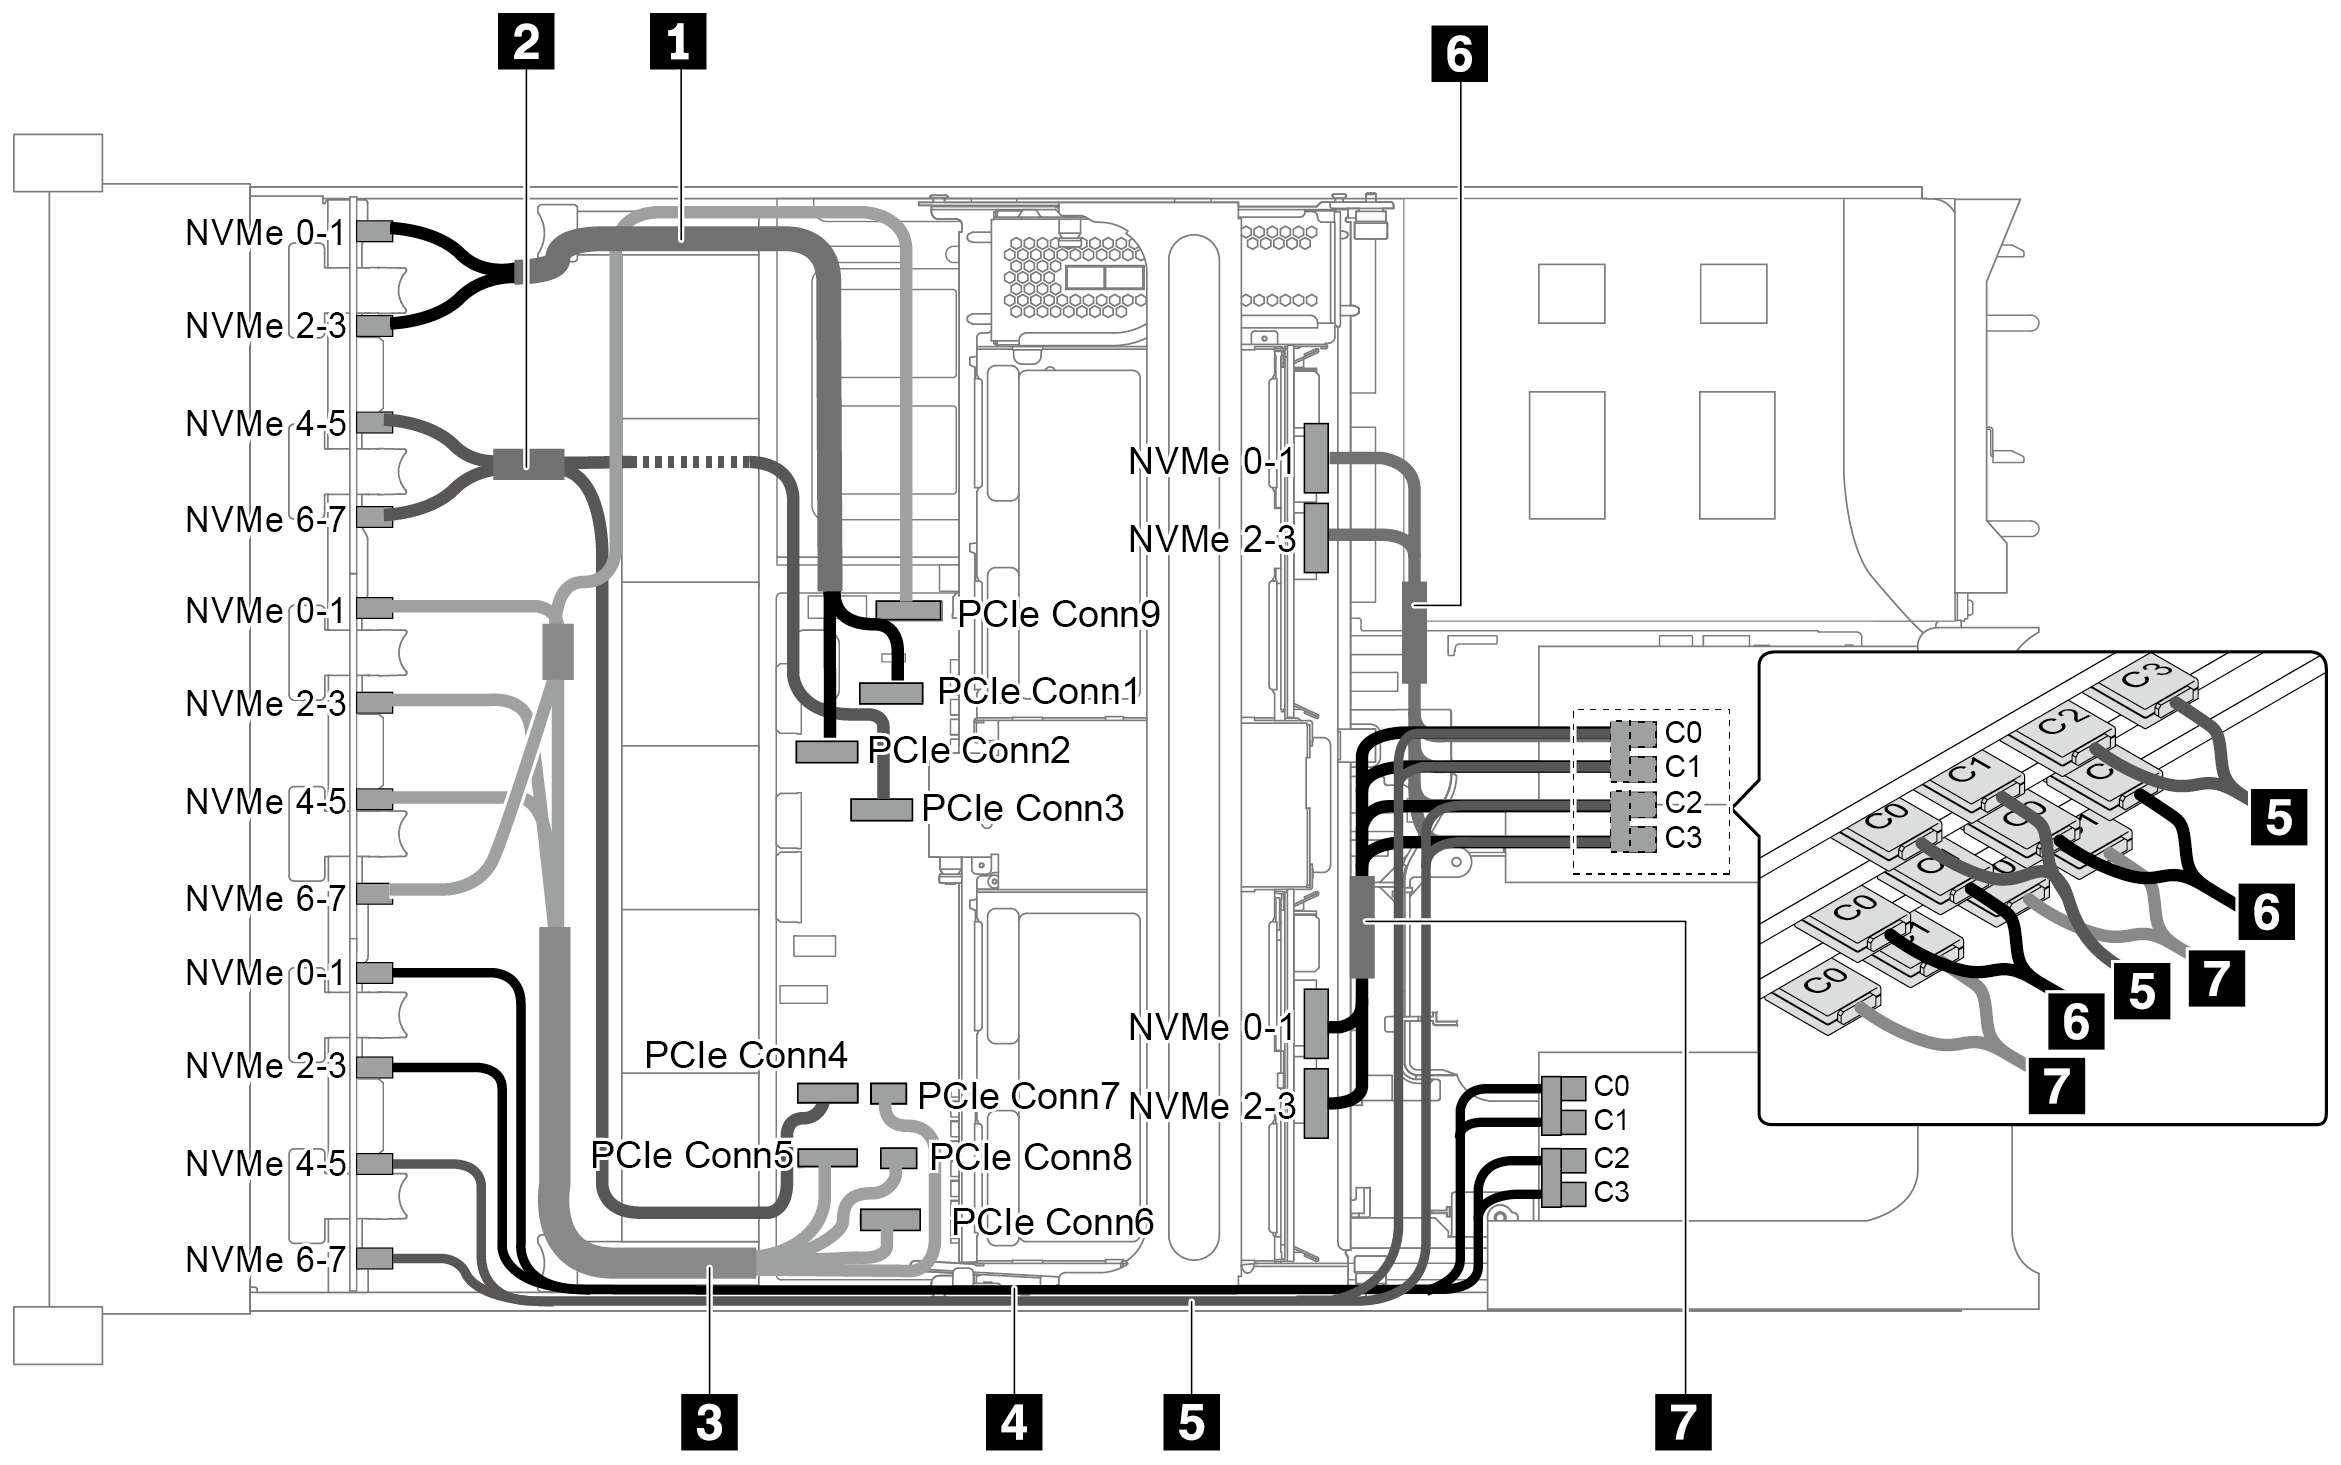 Cable routing for configuration with three 8 x 2.5" NVMe front backplanes, one middle drive cage (NVMe), and four 810-4P or 1610-4P NVMe switch cards